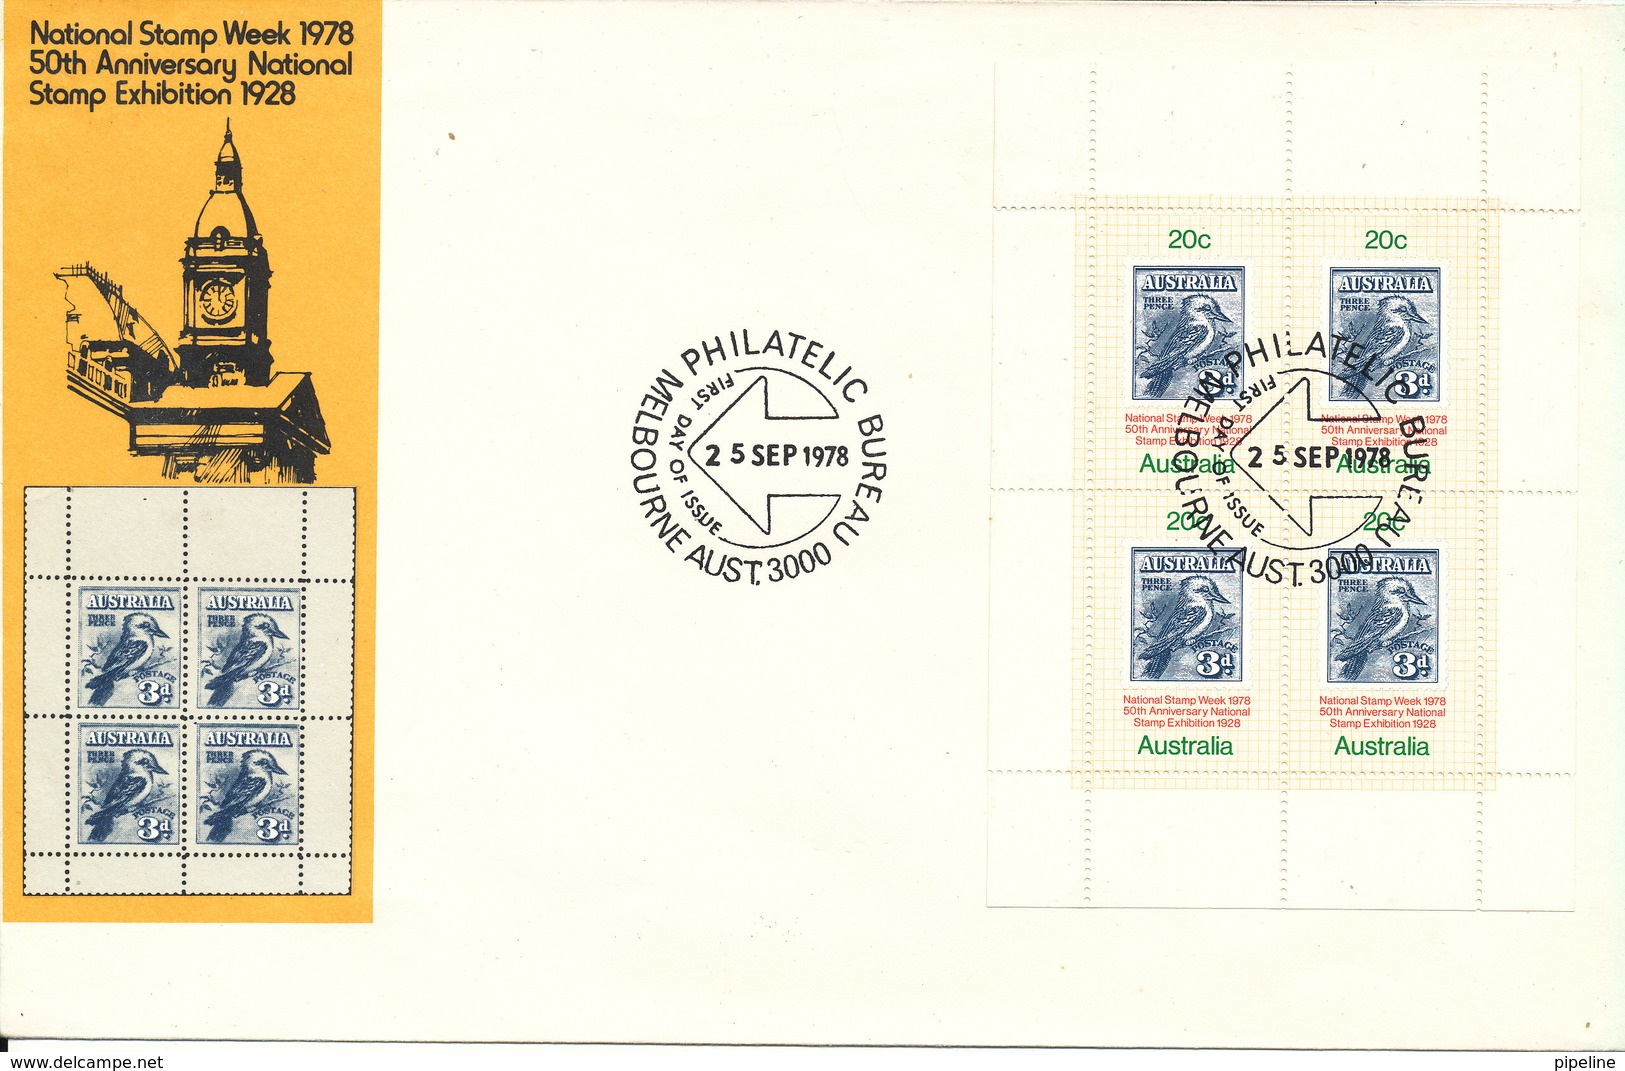 Australia FDC 25-9-1978 National Stamp Week Souvenir Sheet 50th Anniversary National Stamp Exhibition 1928 With Cachet - Premiers Jours (FDC)